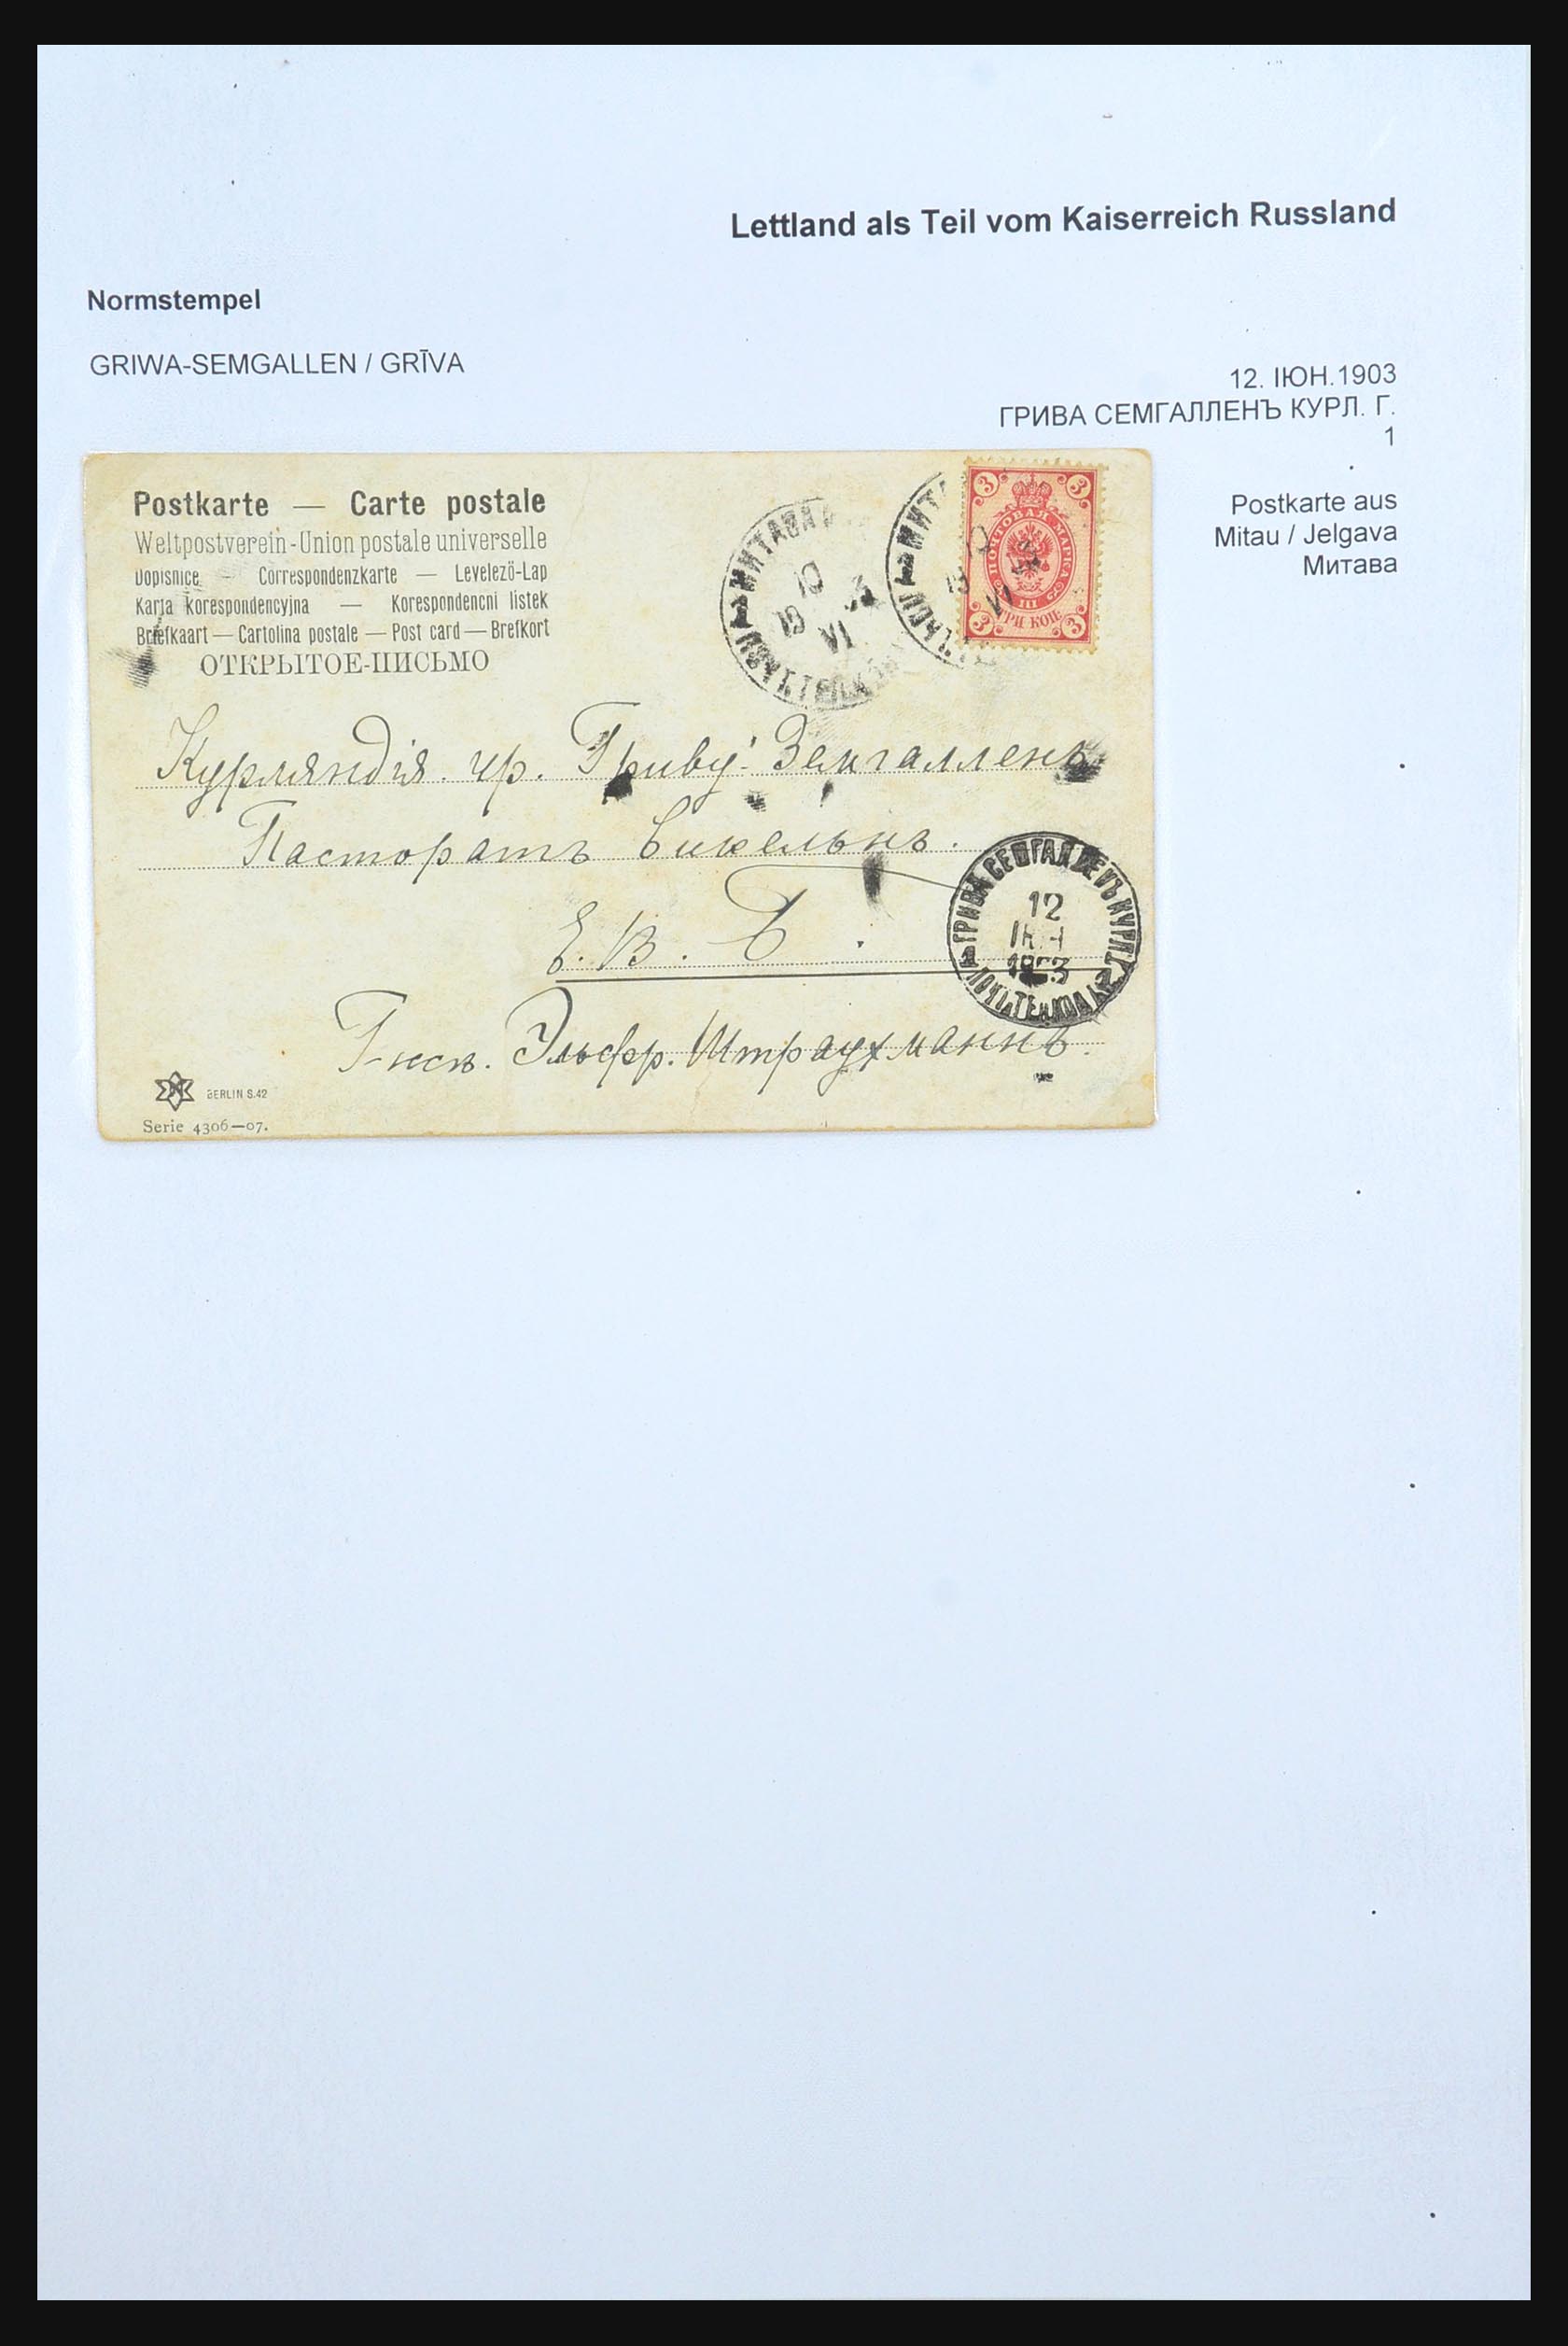 31305 044 - 31305 Latvia as part of Russia 1817-1918.